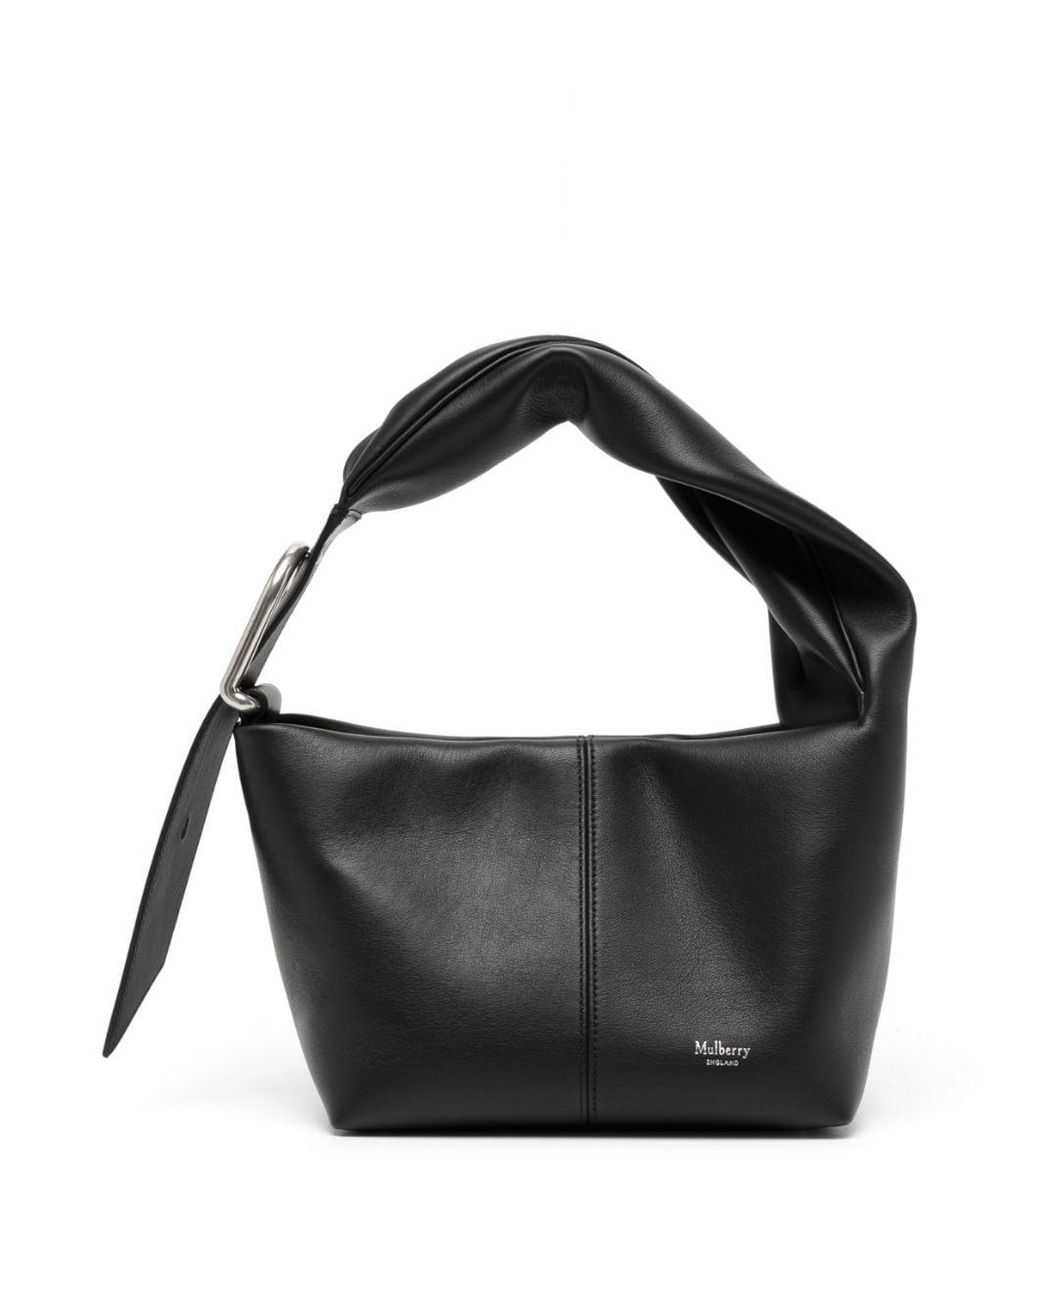 Mulberry Smal Retwist Hobo Leather Bag in Black | Lyst